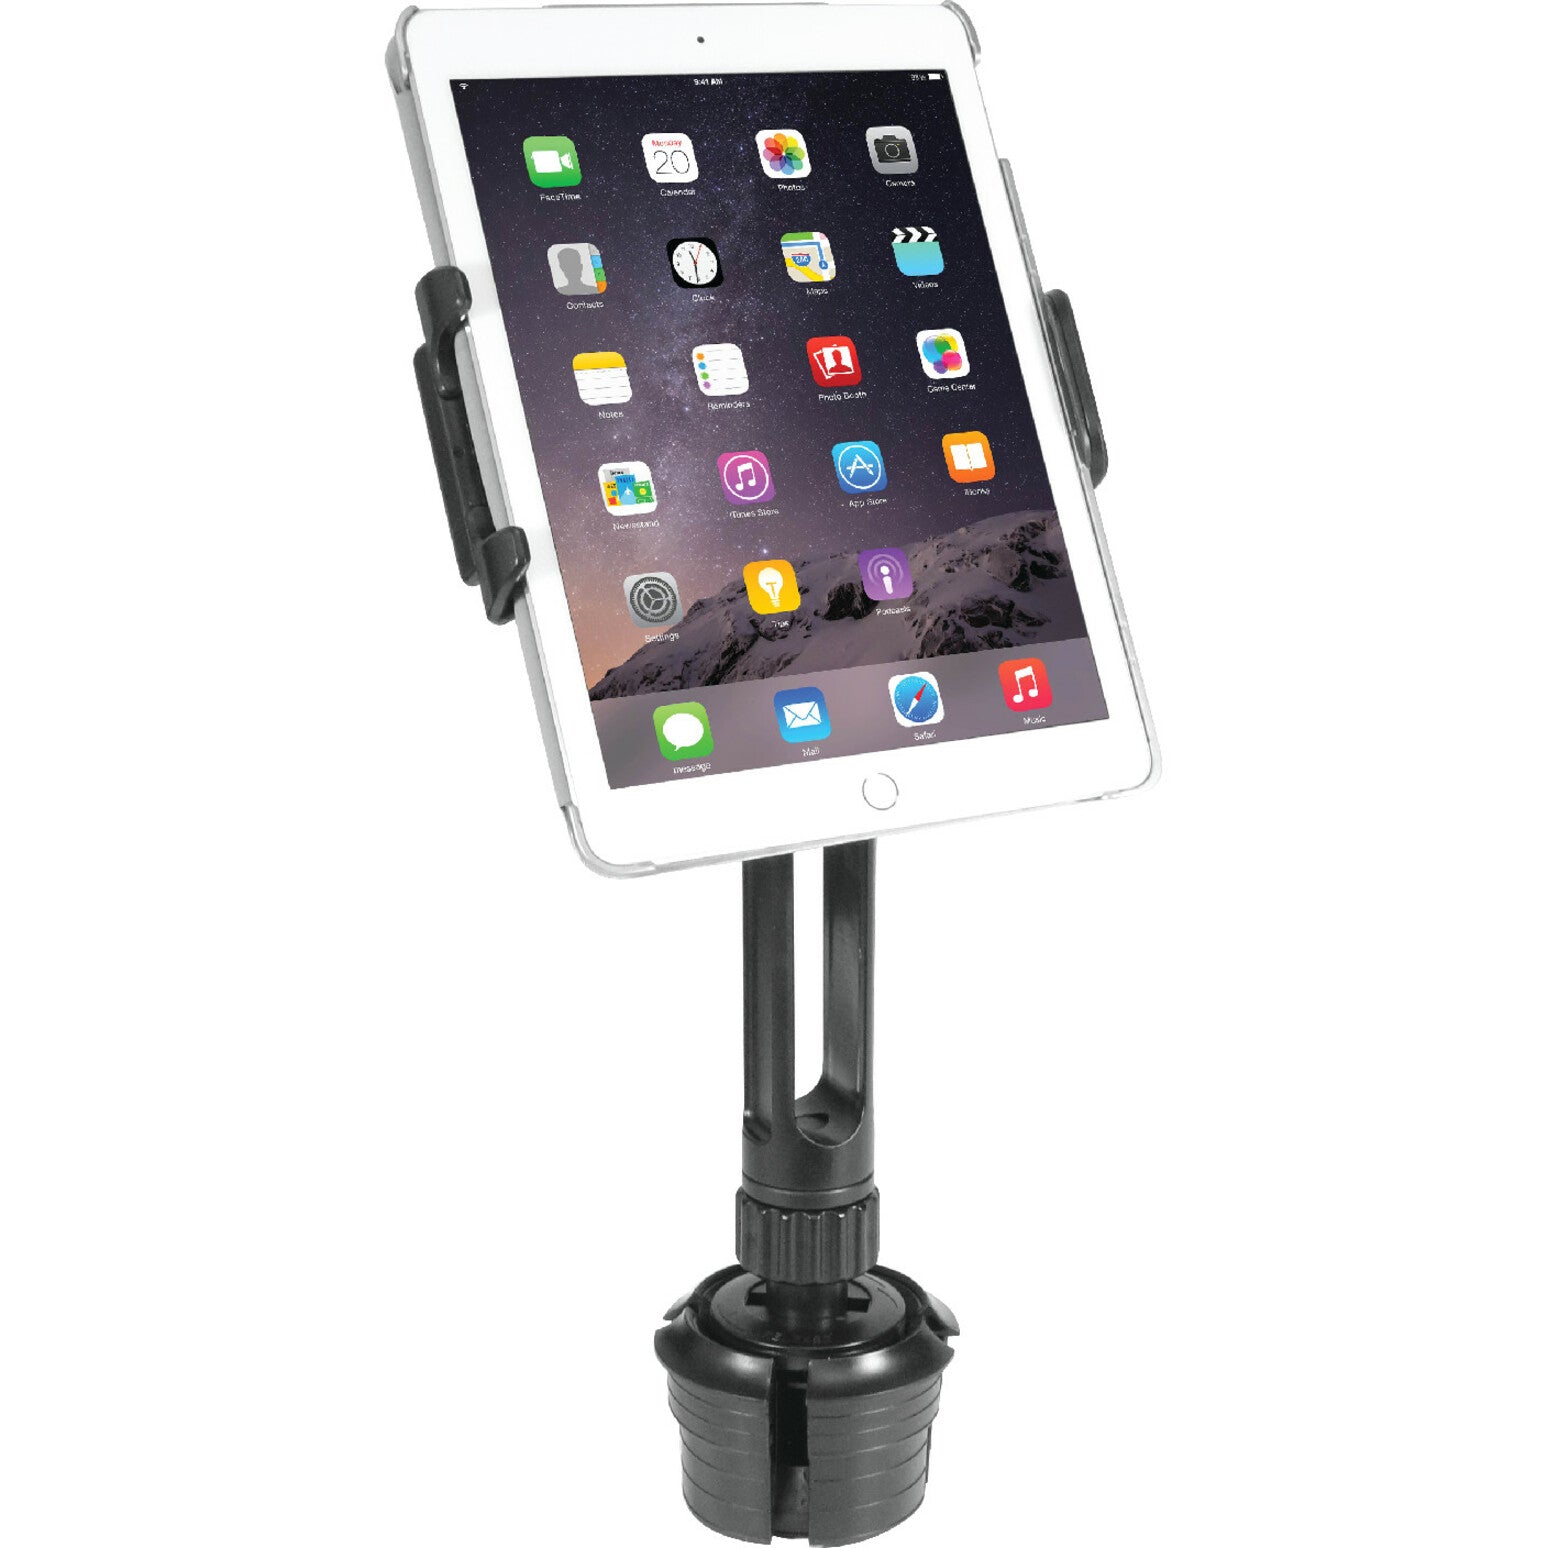 Macally MCUPPRO Smartphone/Tablet Holder, Tilt, Optimal Viewing, Secure, Cushioned Grip, Adjustable, 360° Rotation, Space Saving Design, Expandable Base